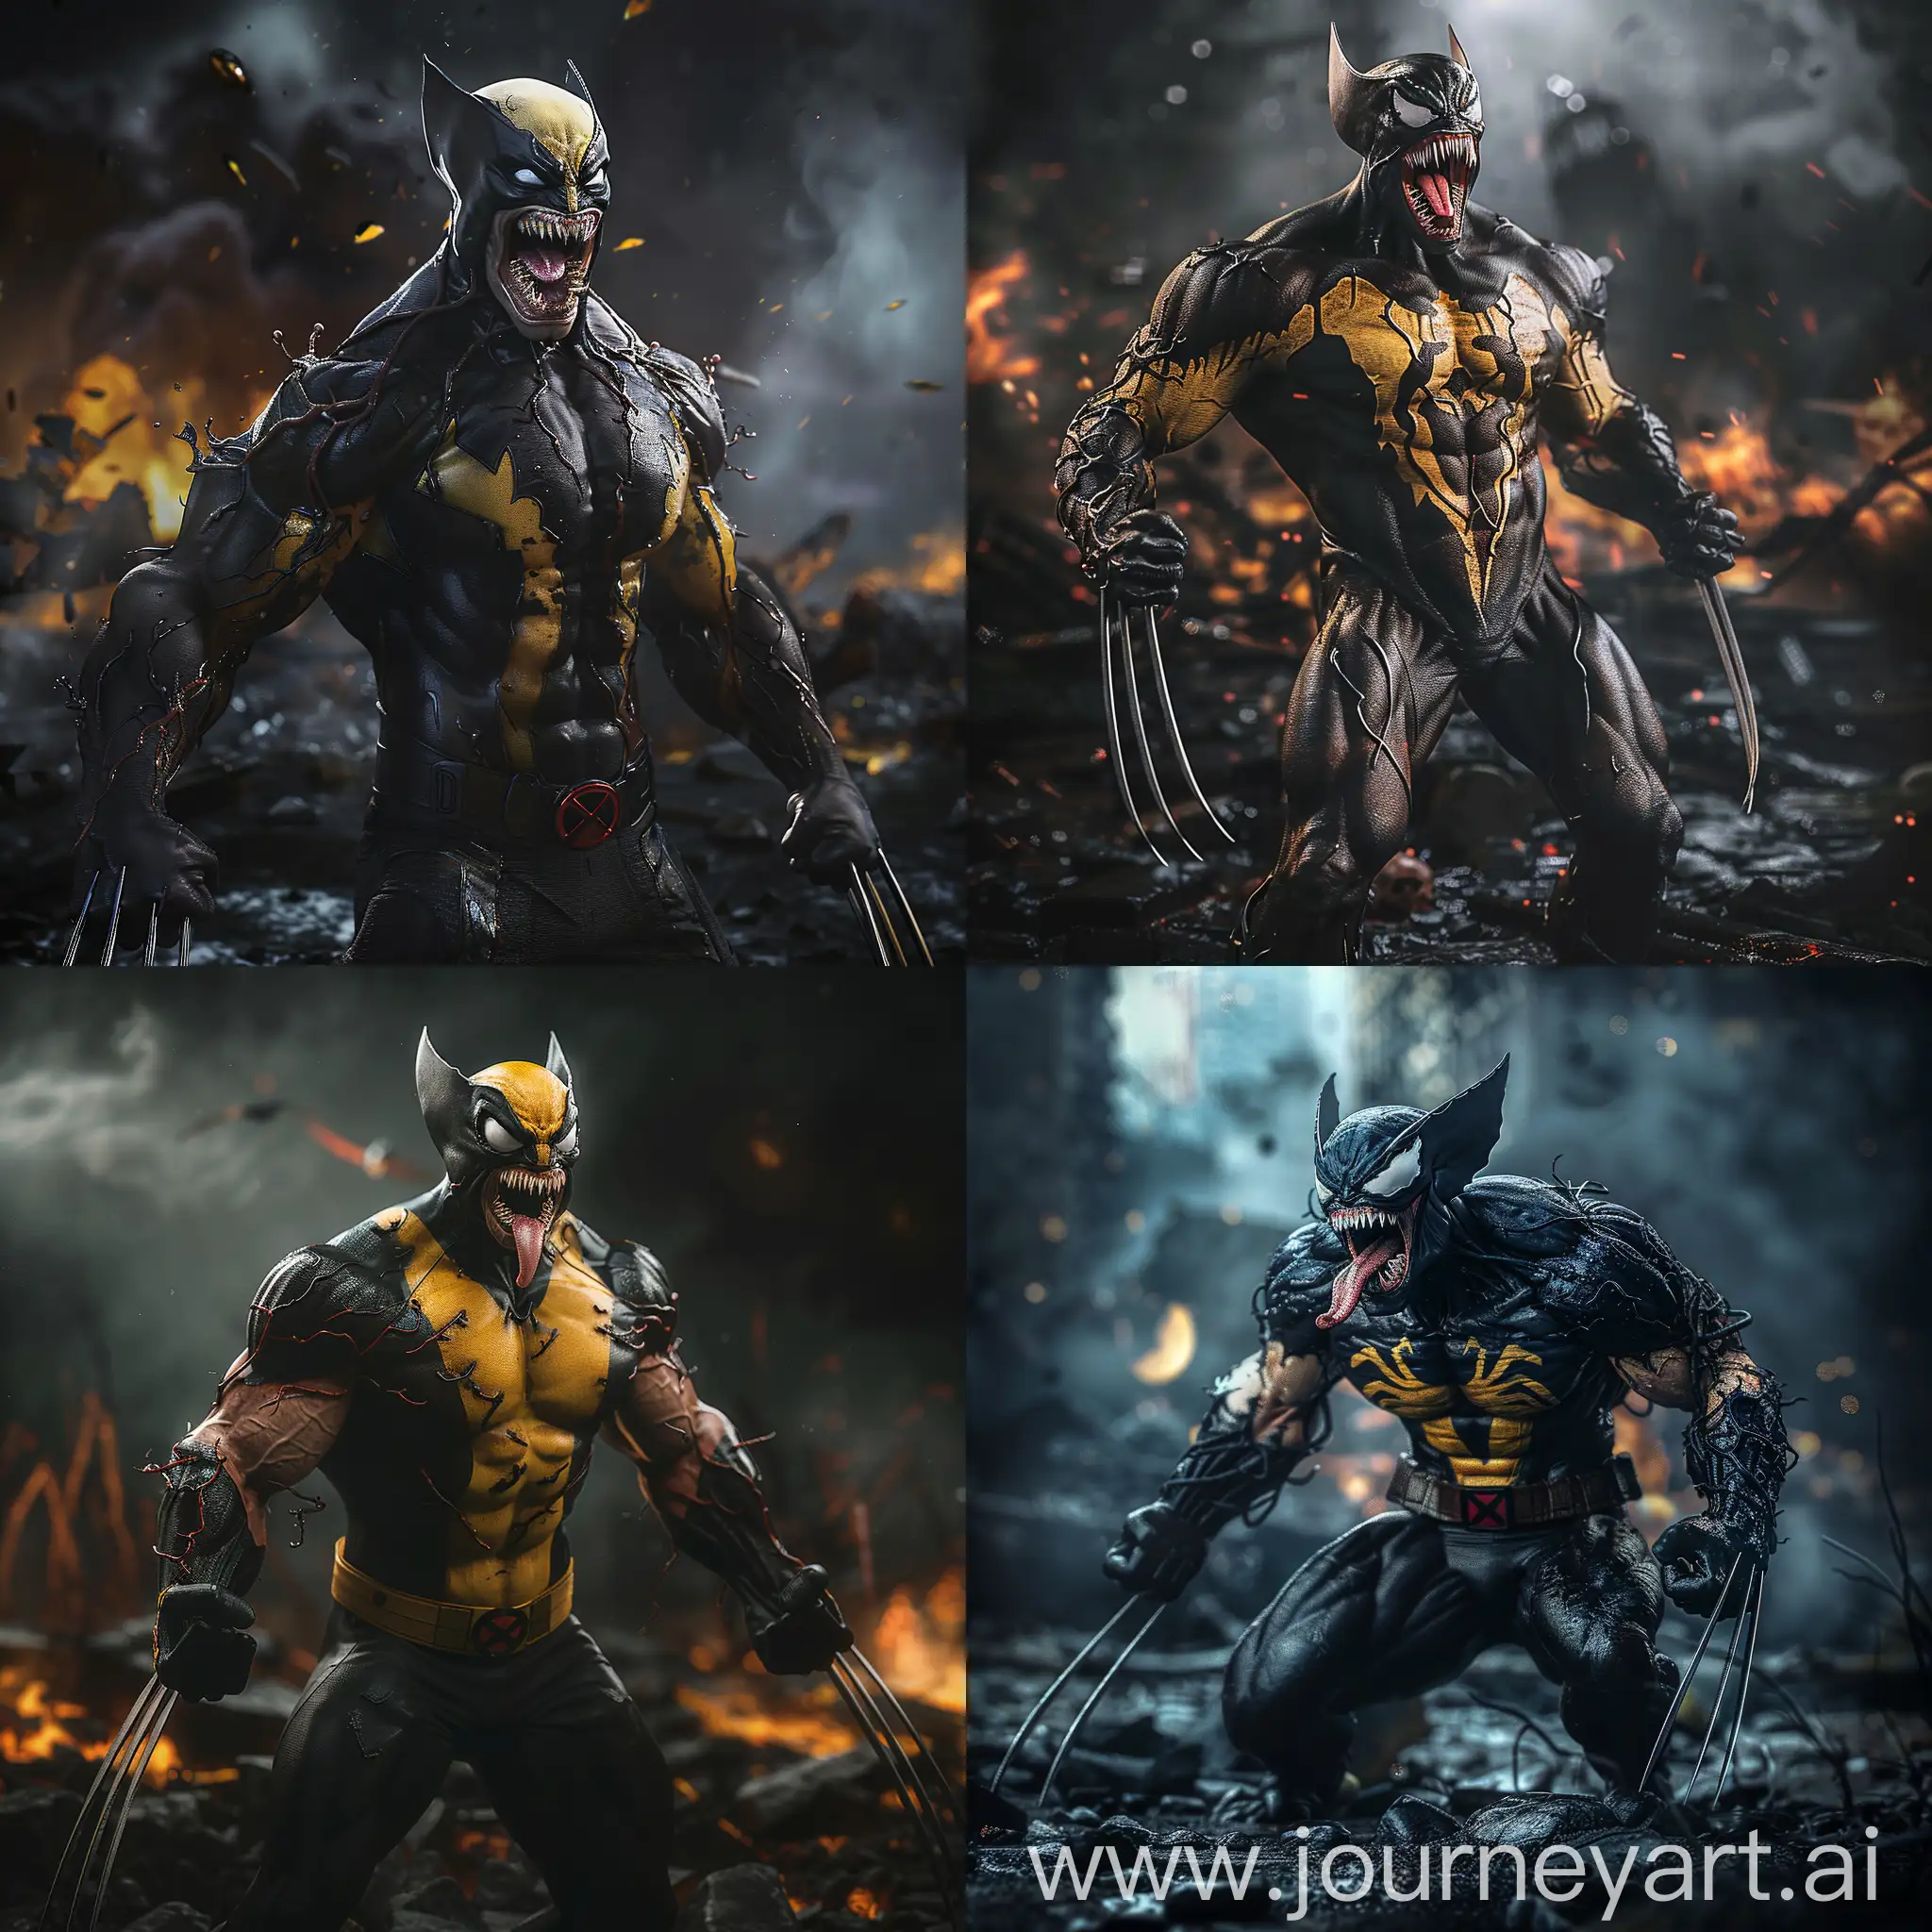 Dynamic pose, Wolverine from Marvel as venom from Marvel, looking into the camera, open mouth, hell on the background, angry and gloomy look, standing half-side, full body pose, realism, ultra detail dark background with destruction, cinematic, 8k, hd